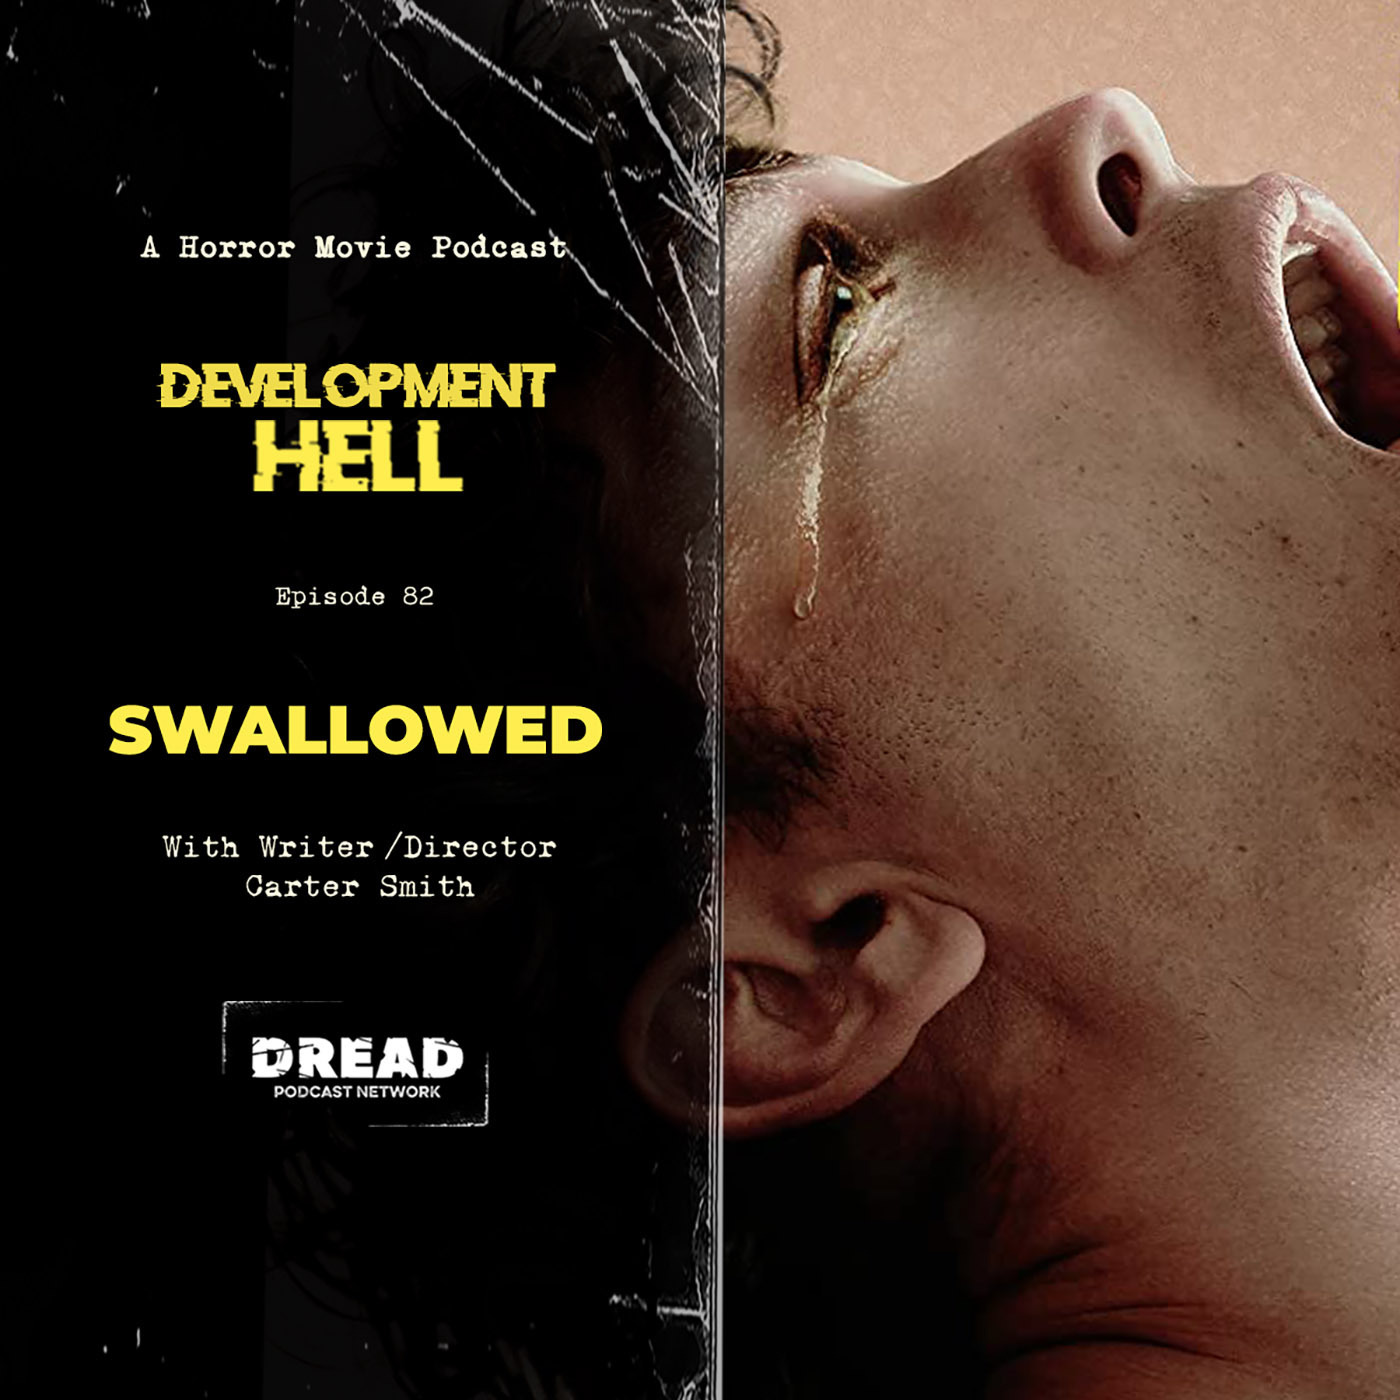 SWALLOWED (with writer/director Carter Smith)